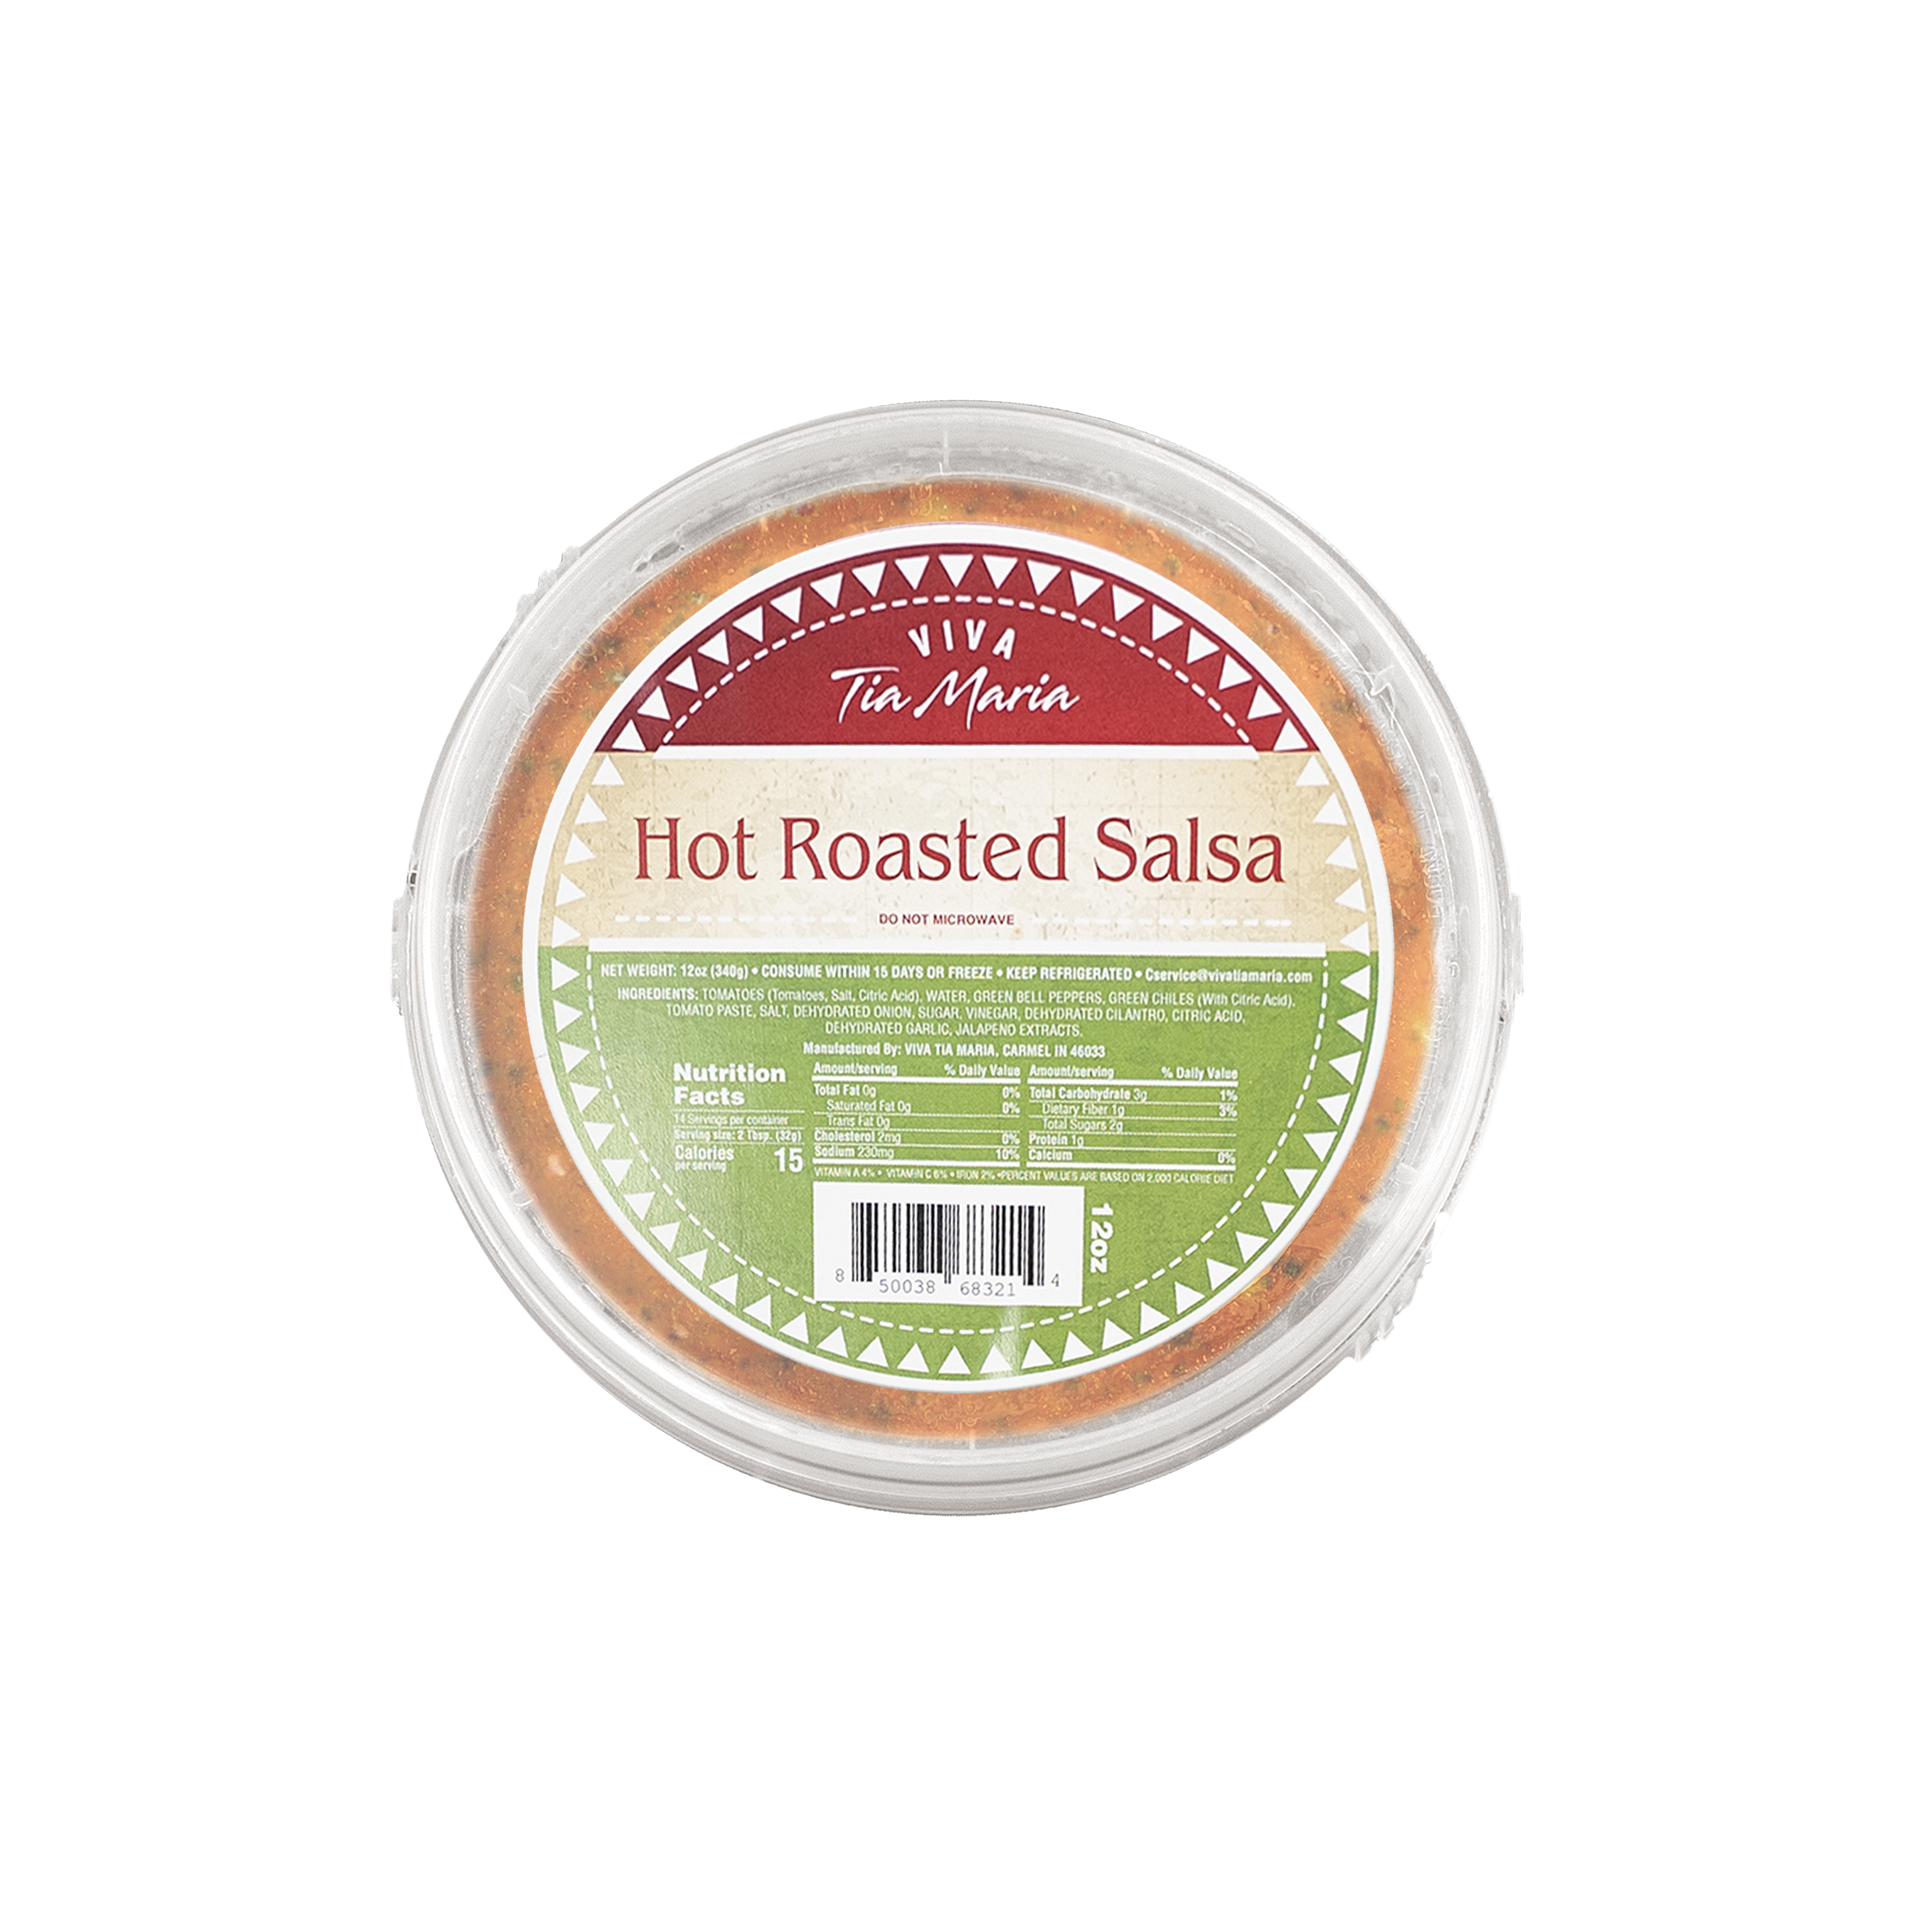 Hot Roasted Salsa.png